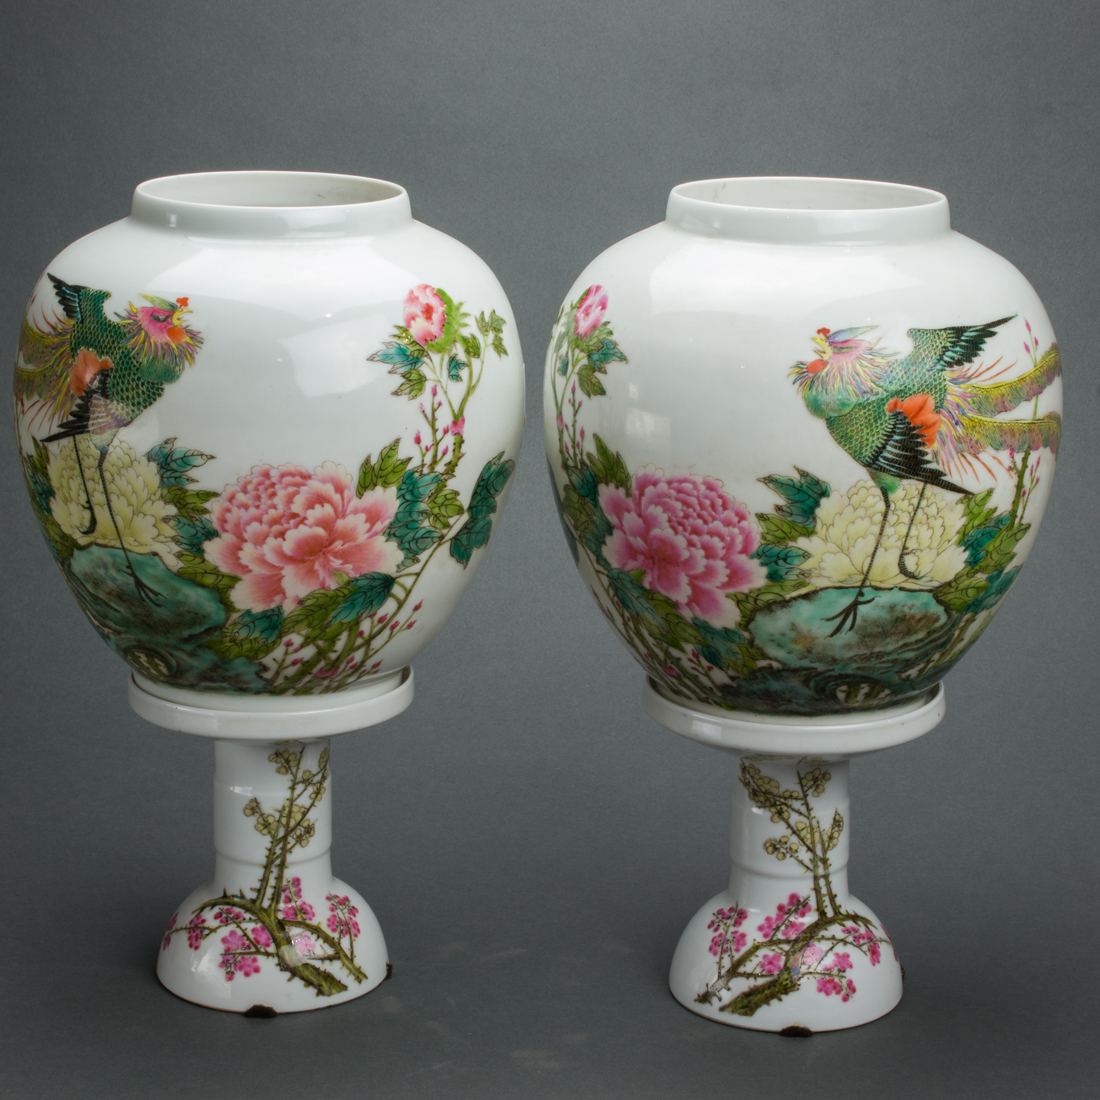 PAIR OF CHINESE FAMILLE ROSE EGG SHELL 3a10c4